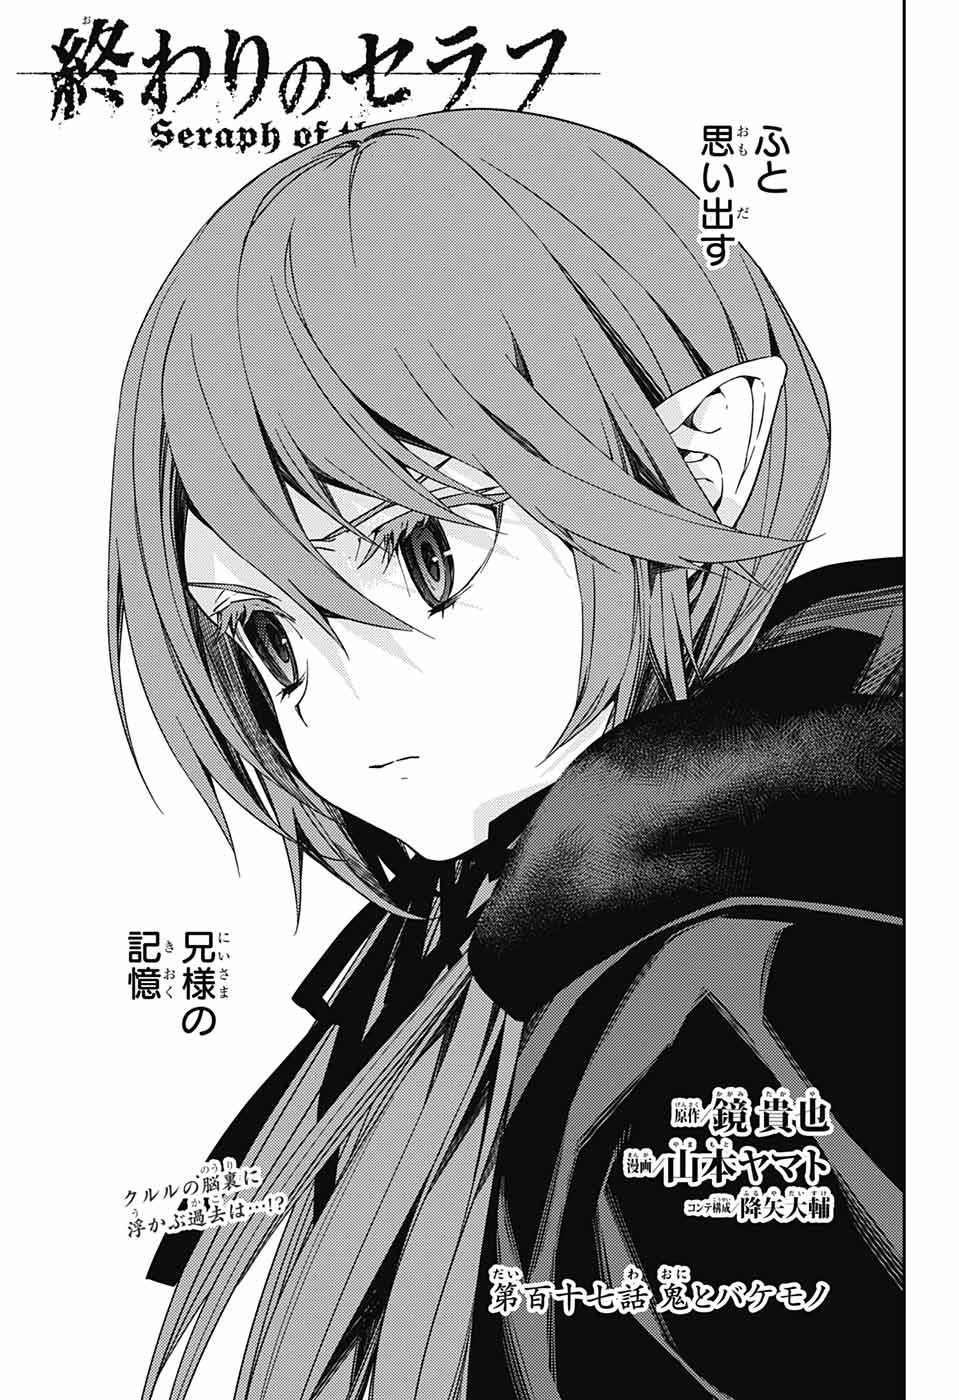 Seraph of the End Chapter 117 Spoilers, Raw Scans, Leaks & Release Date